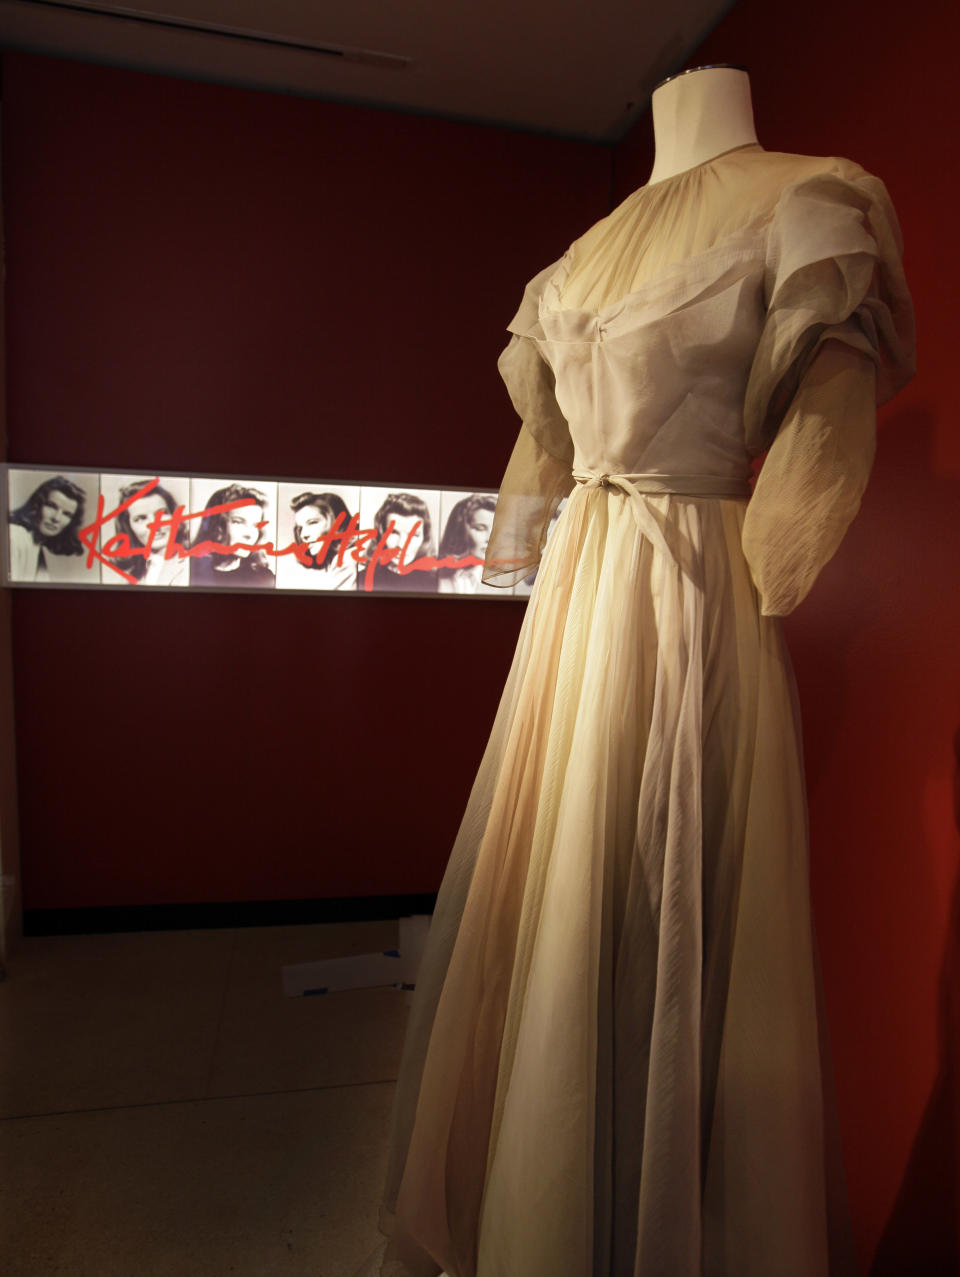 A gown by Valentina, from the 1942 production of "Without Love," is shown as part of the "Katharine Hepburn: Dressed for Stage and Screen" exhibit in the New York Public Library for the Performing Arts at Lincoln Center, Tuesday, Oct. 16, 2012. (AP Photo/Richard Drew)